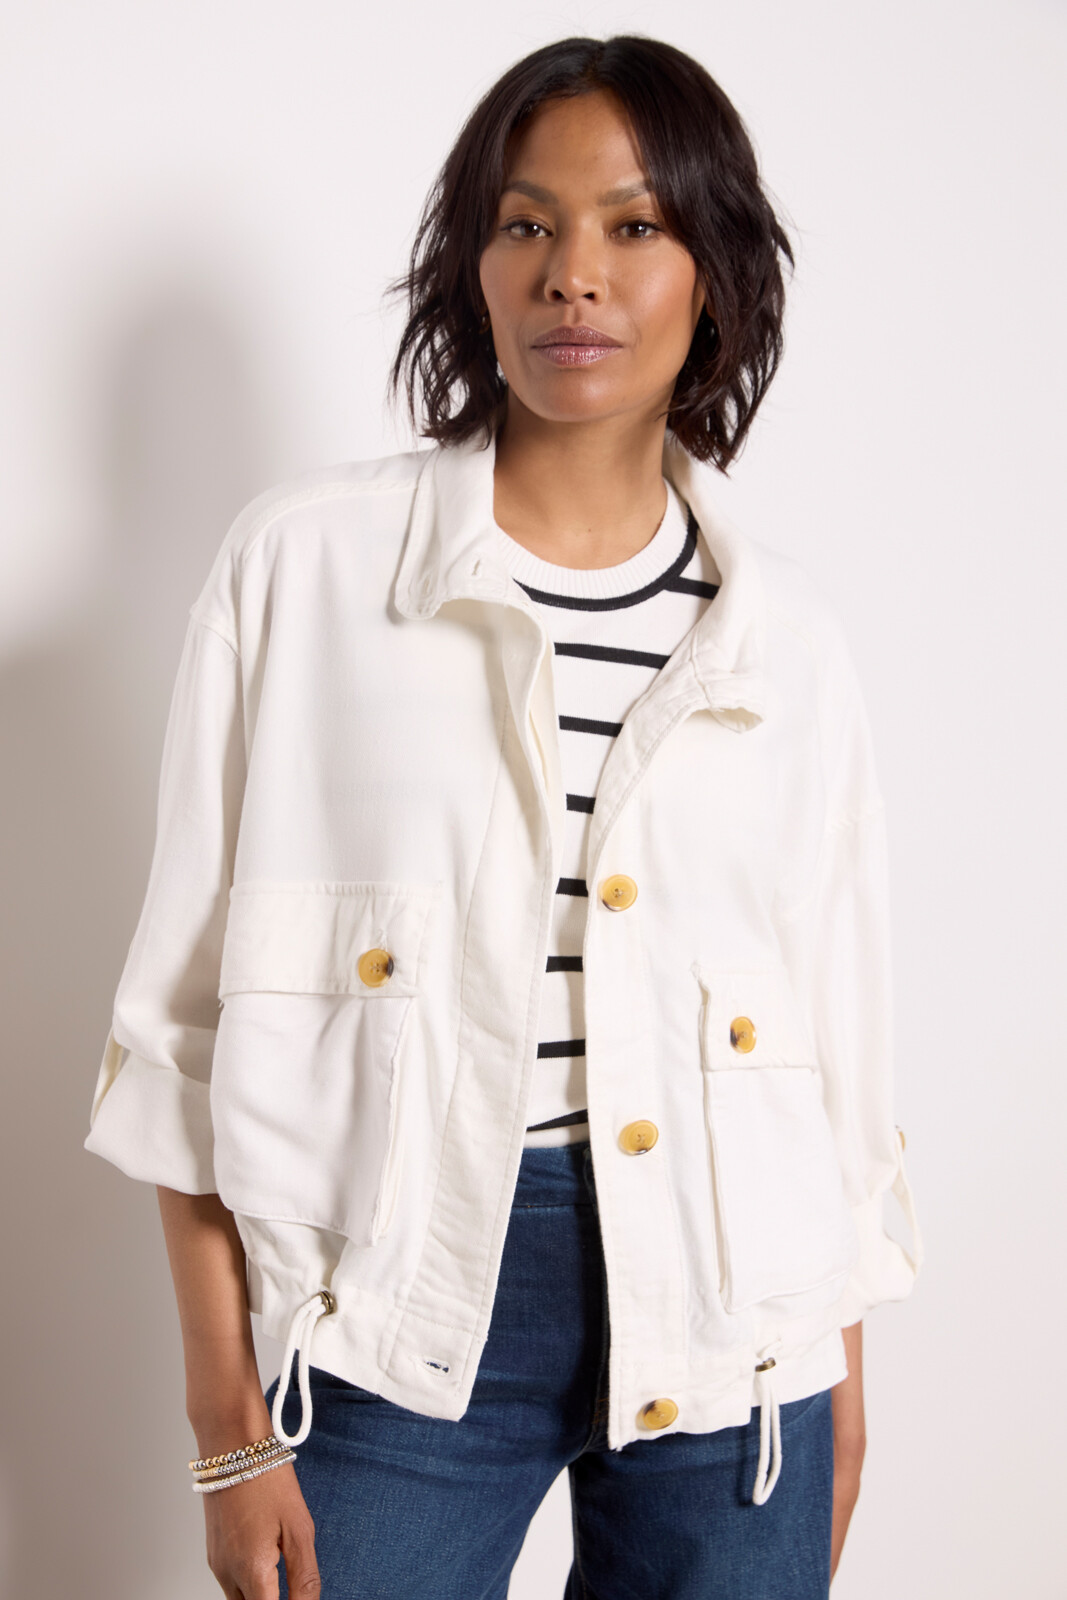 Blanknyc Women's Above The Clouds Utility Jacket, Size M, White